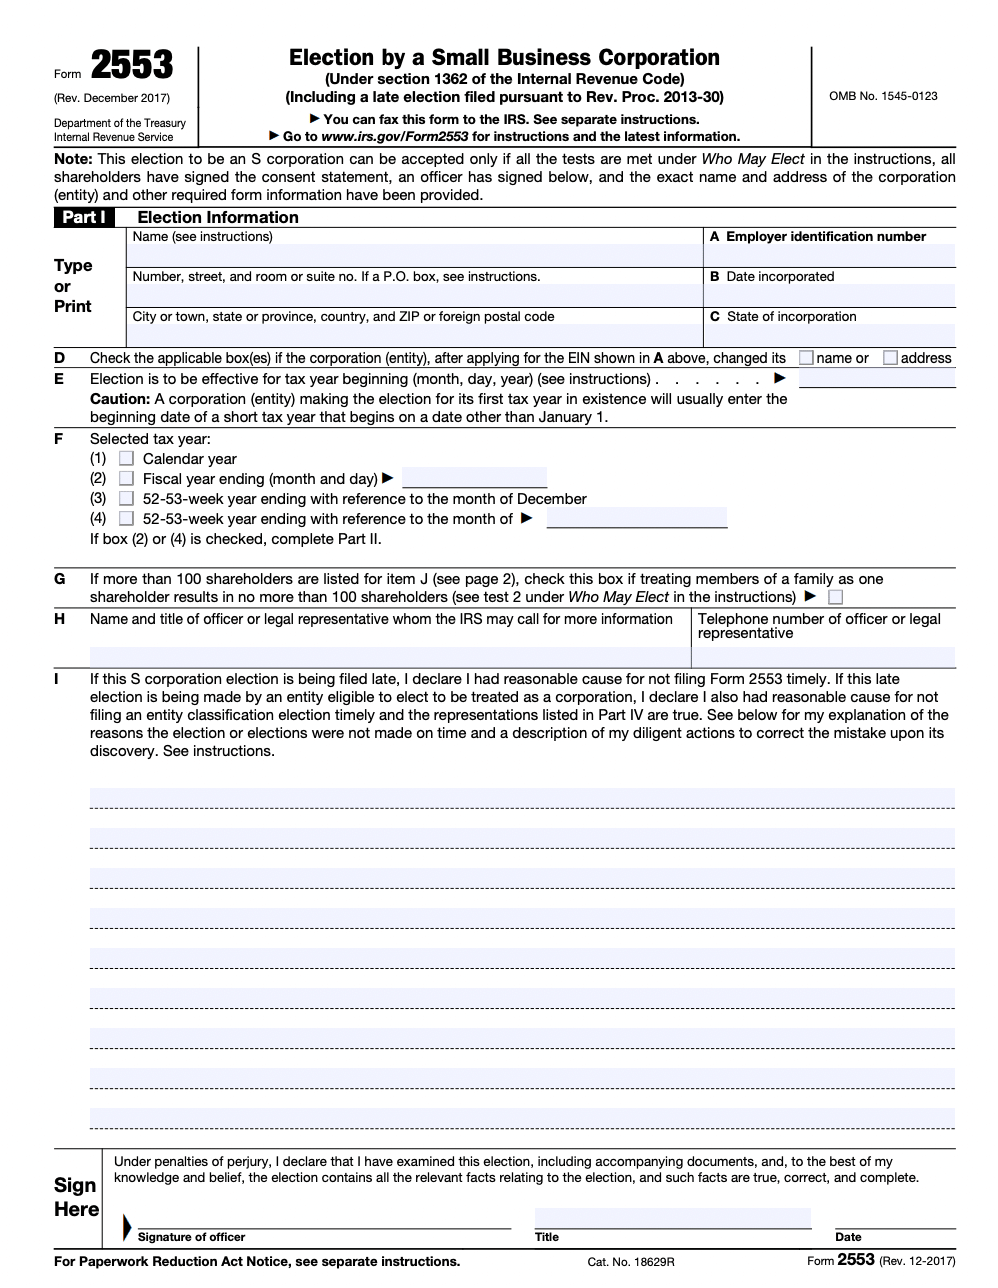 Form 2553 for Election by a Small Business Corporation under the Internal Revenue Code. File for S corporation status. Fax or visit IRS website for instructions. Taxes.